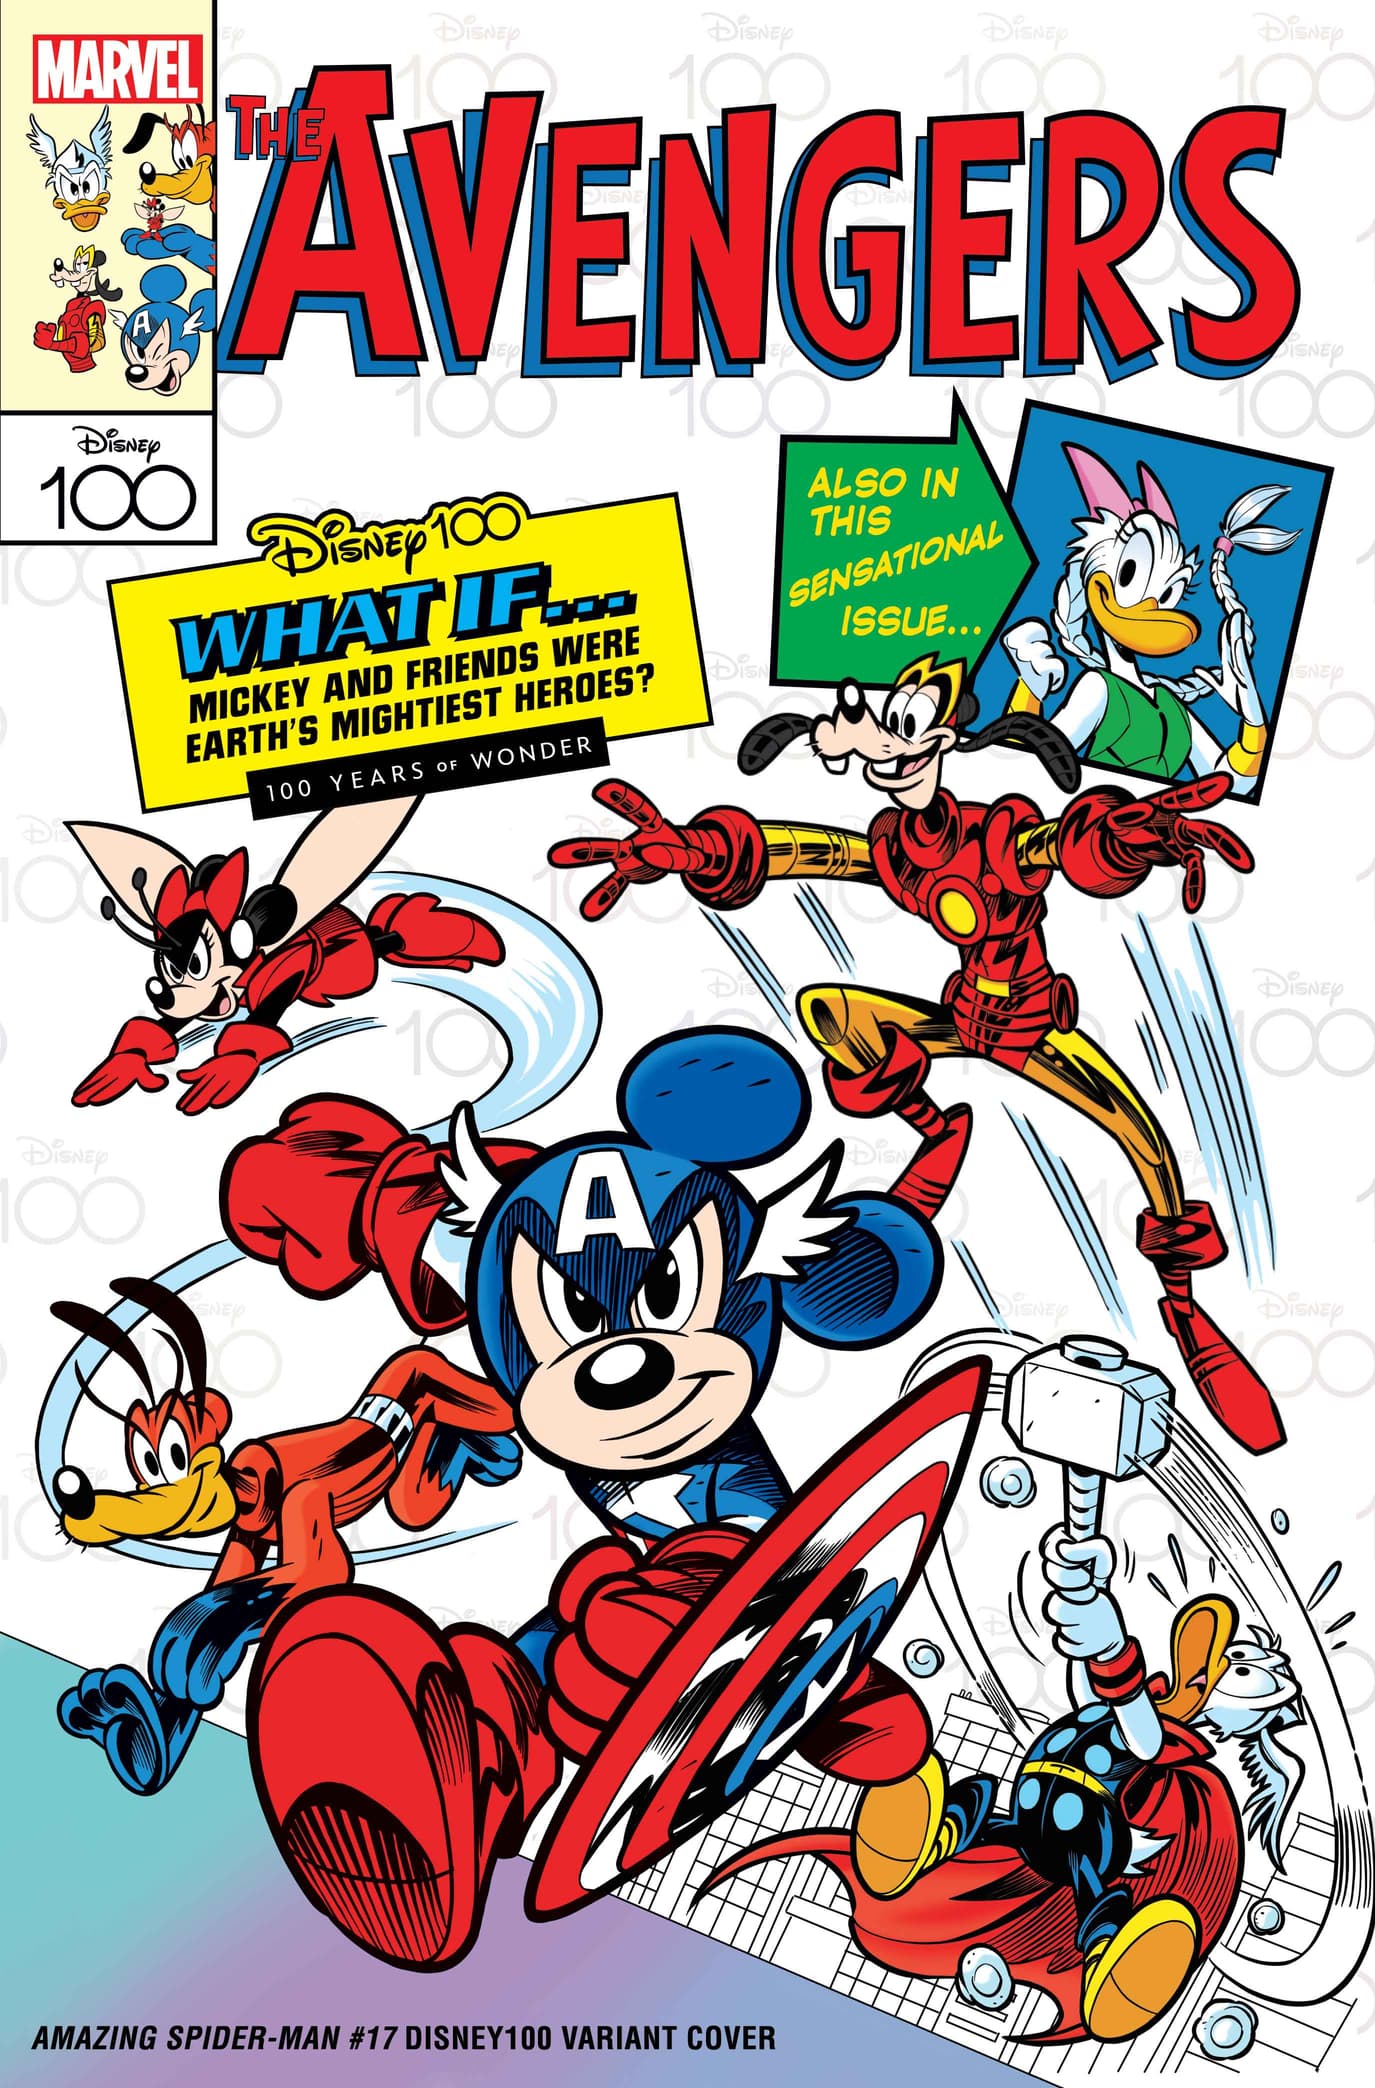 Marvel Comics to Join Next Year's Disney 100 Years of Wonder Celebration  with Variant Covers Starring Mickey Mouse, Minnie Mouse, and More | Marvel